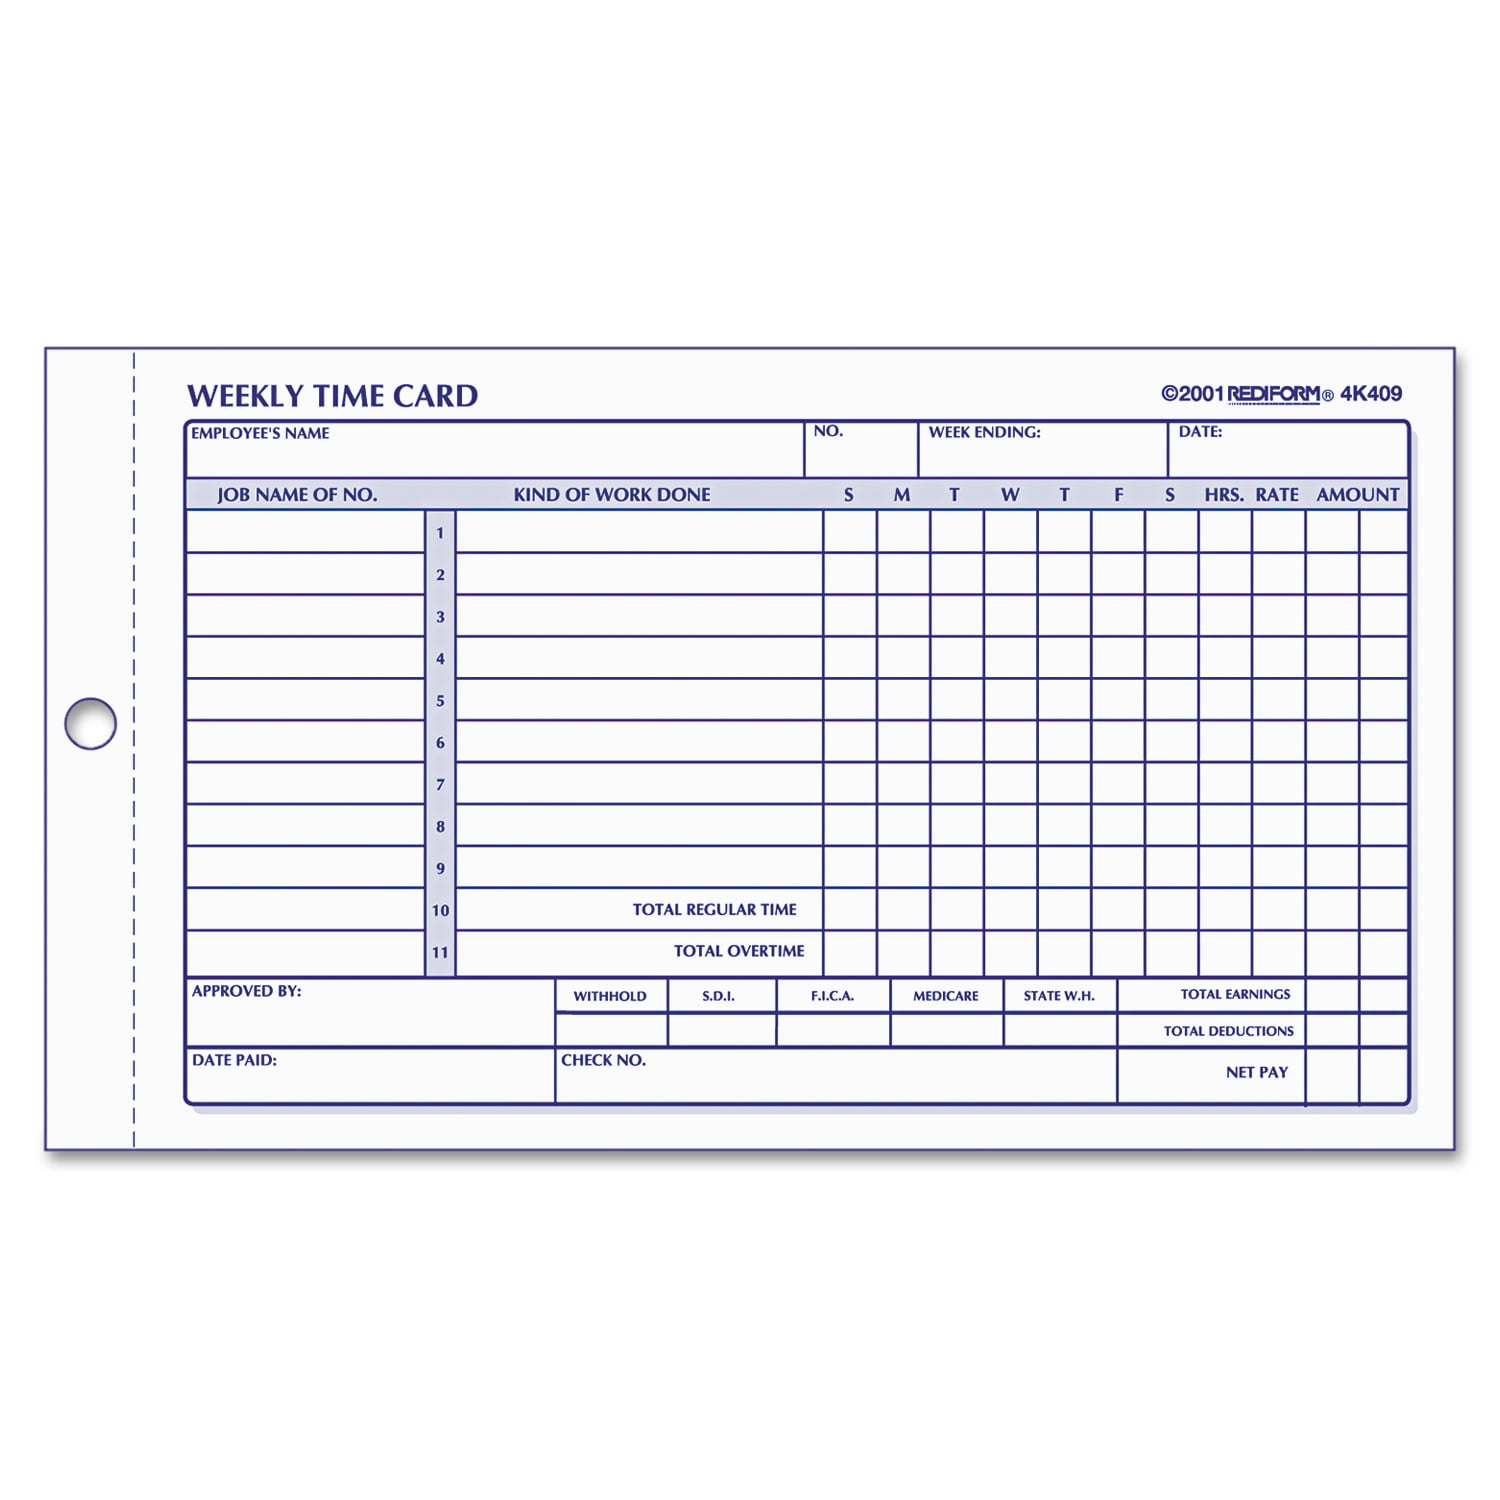 Rediform Weekly Time Cards-Time Card Pads Manila For Weekly Time Wholesale CASE of 25 4-1/4x7 